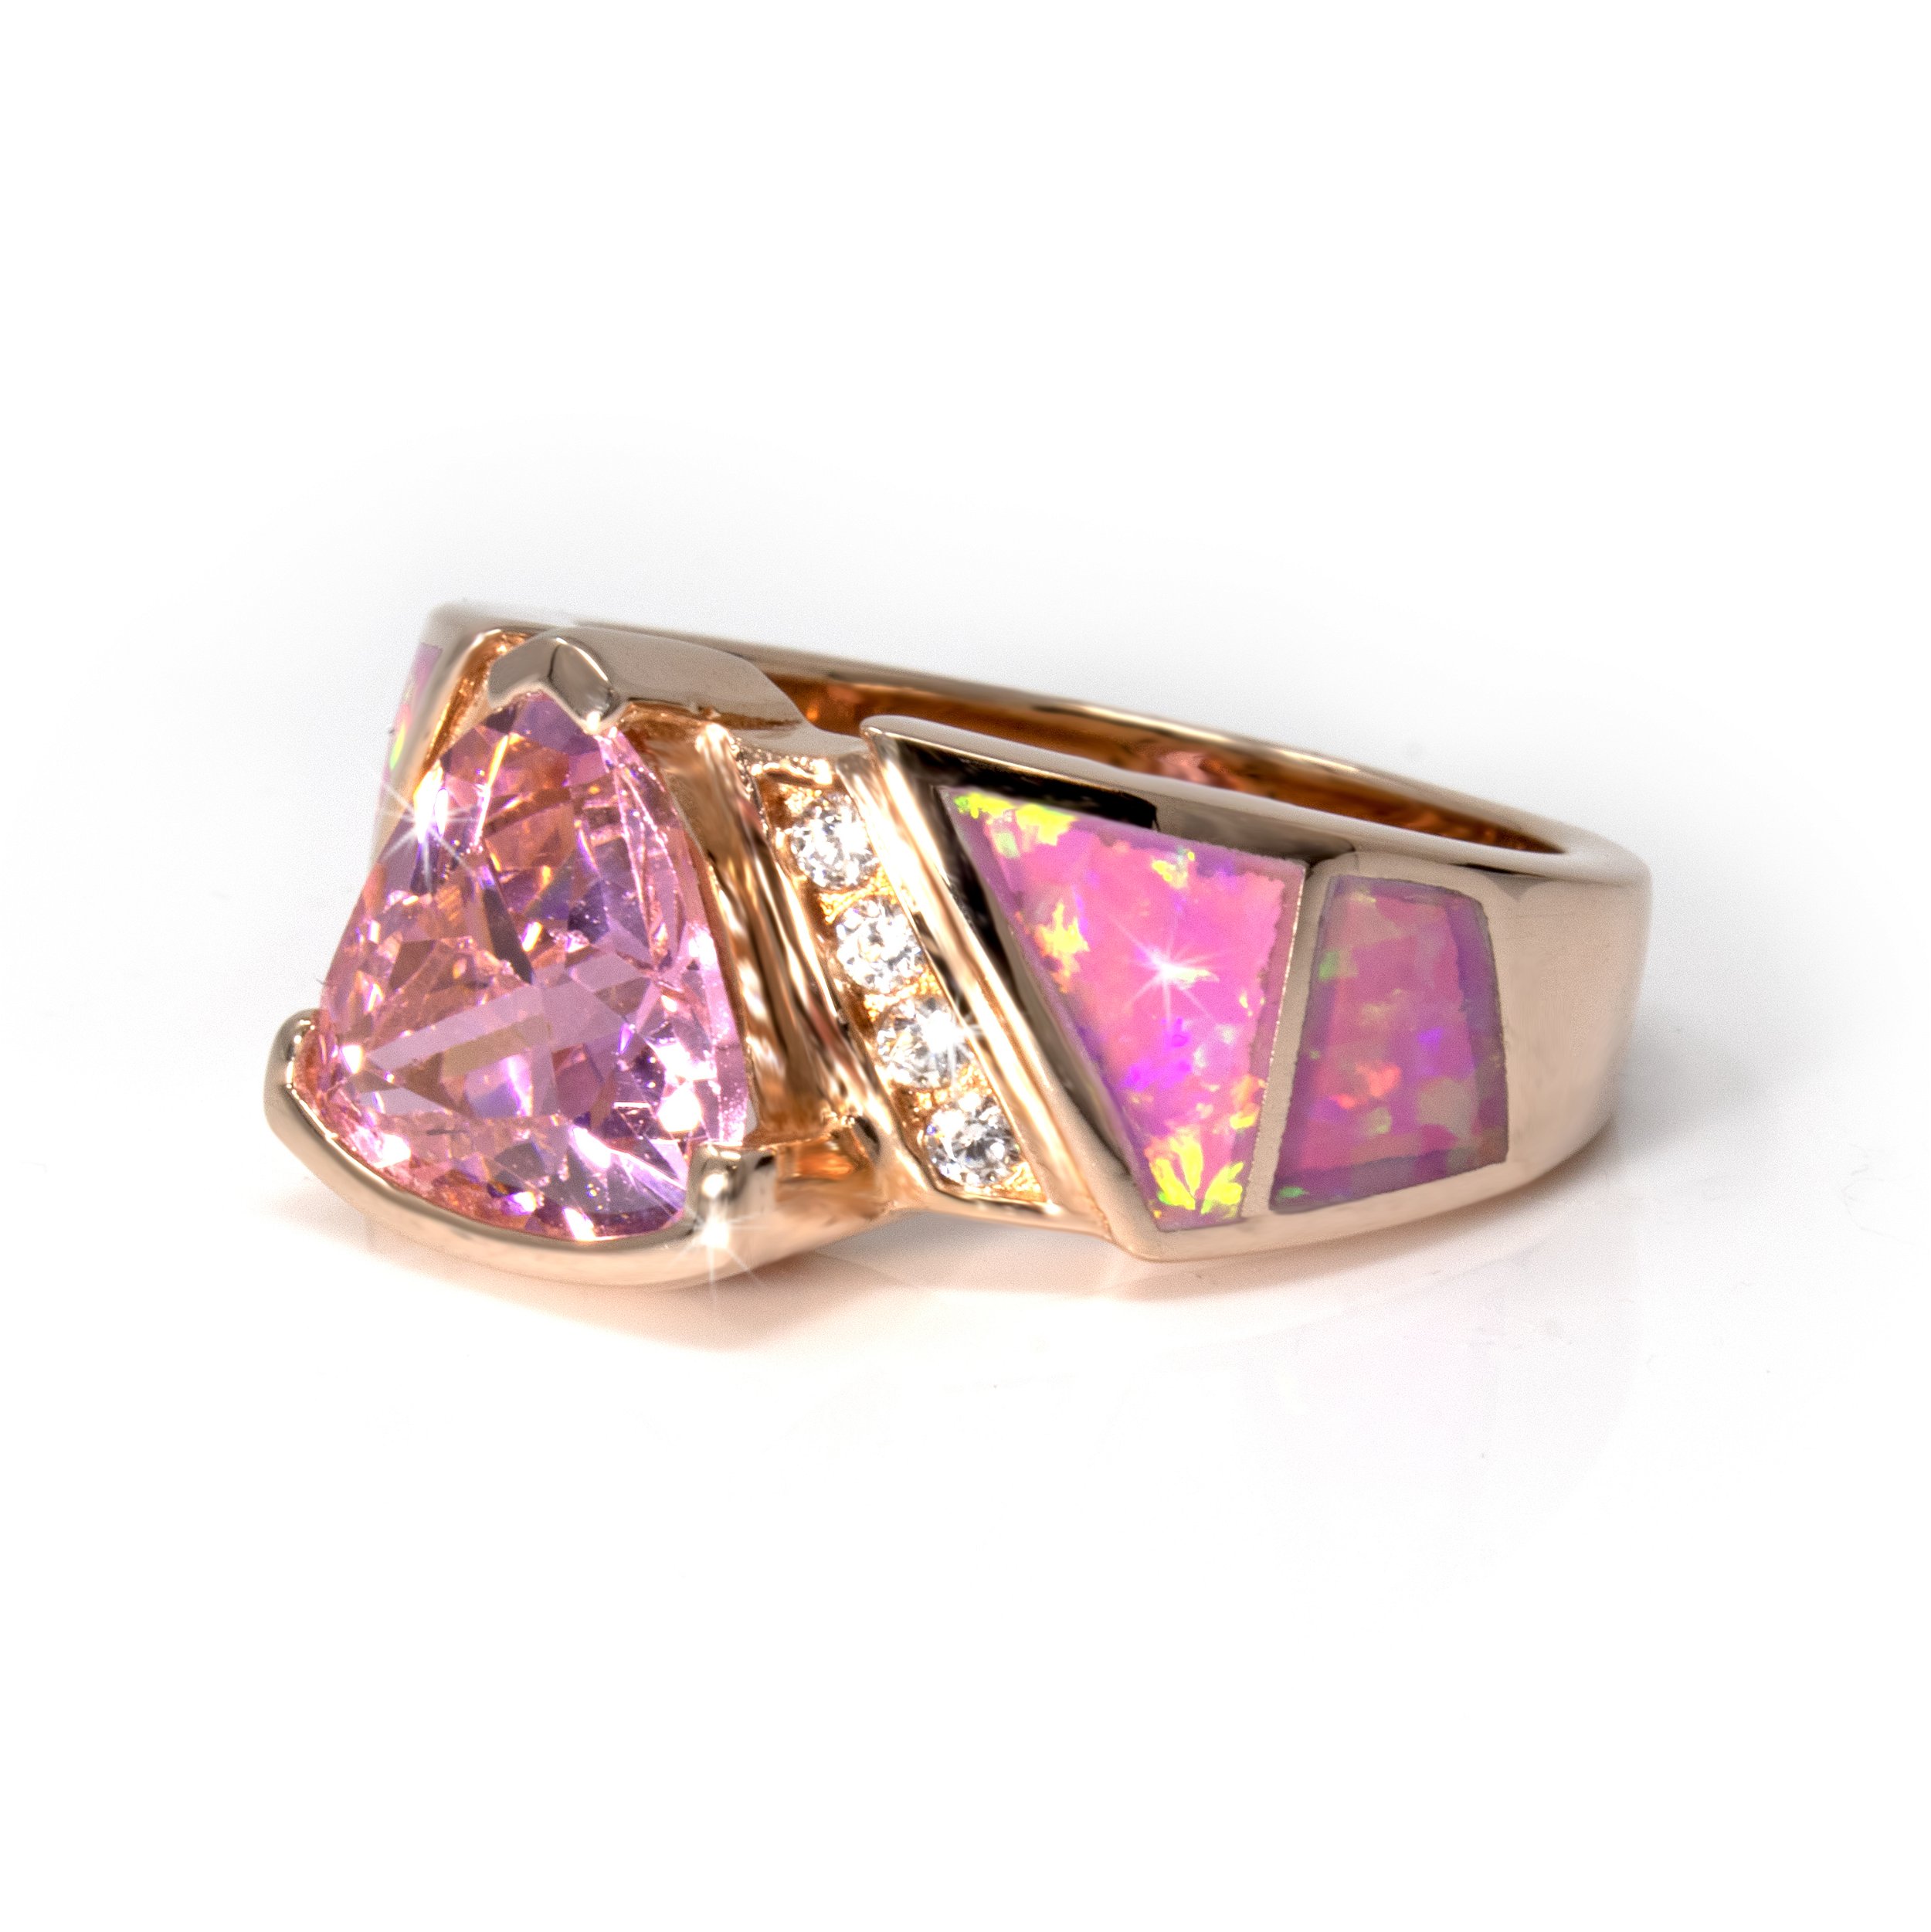 Pink Opal Ring with Rose Gold Overlay Size 8 - Inlaid Top Band With Amethyst Cz Trillion Set In Raised Sterling Silver Half Bezel & 2 White Cz Trios On Side